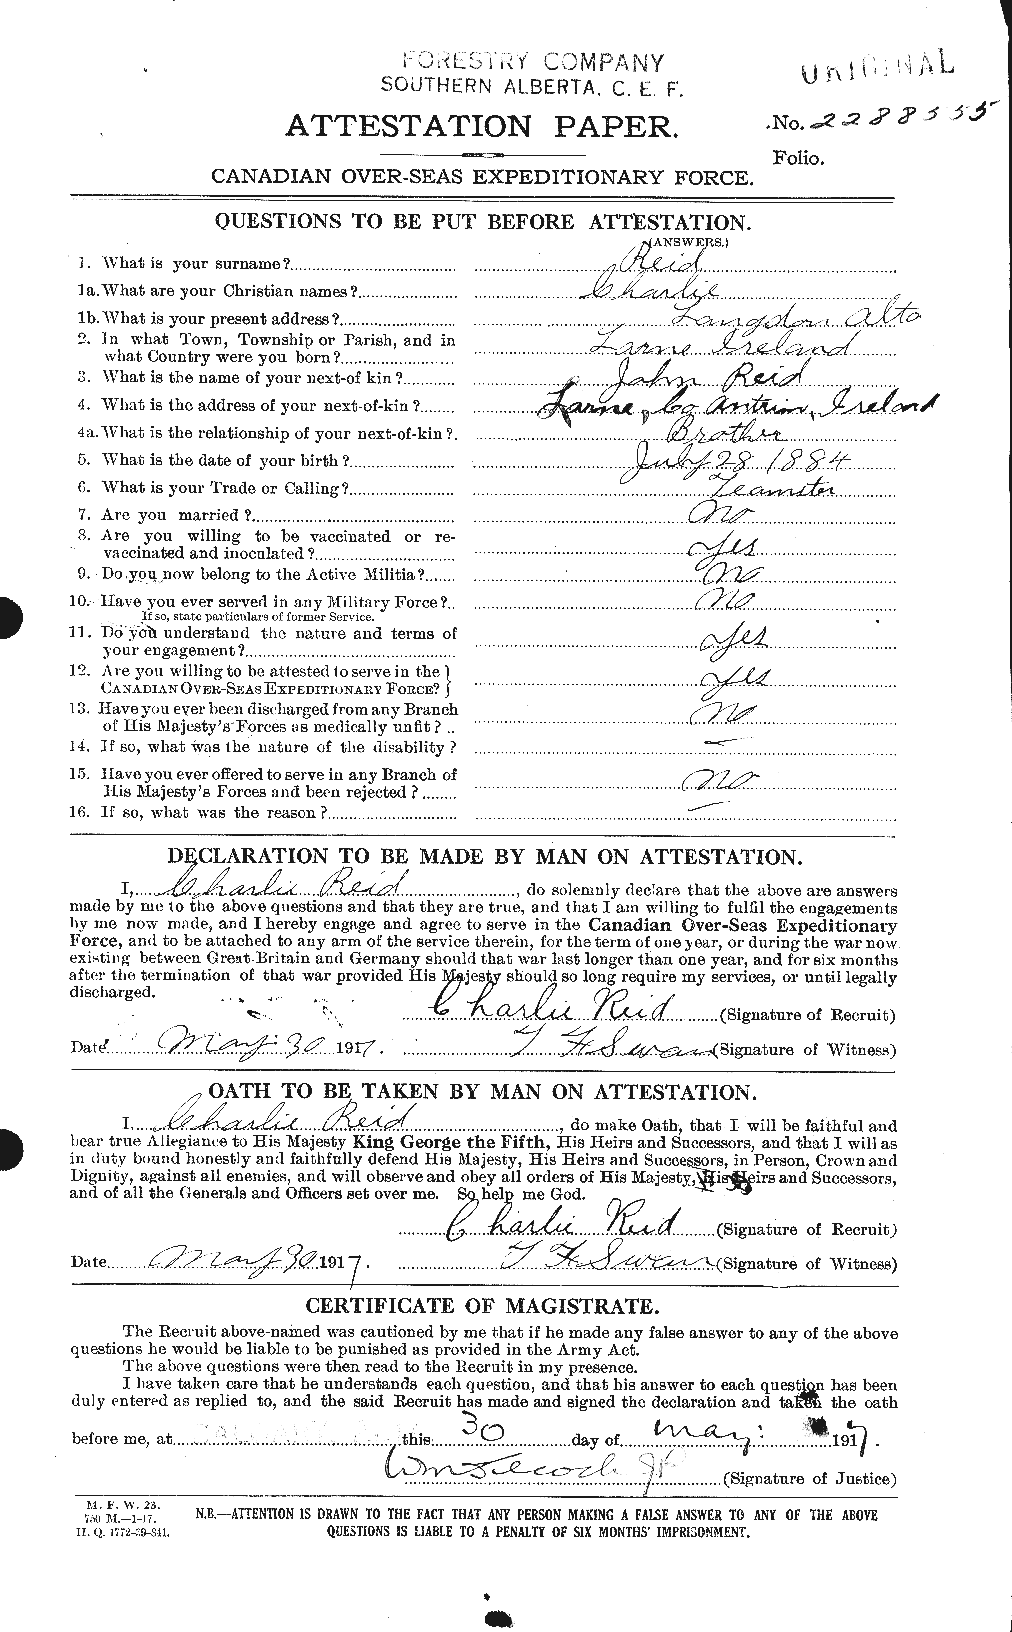 Personnel Records of the First World War - CEF 597901a